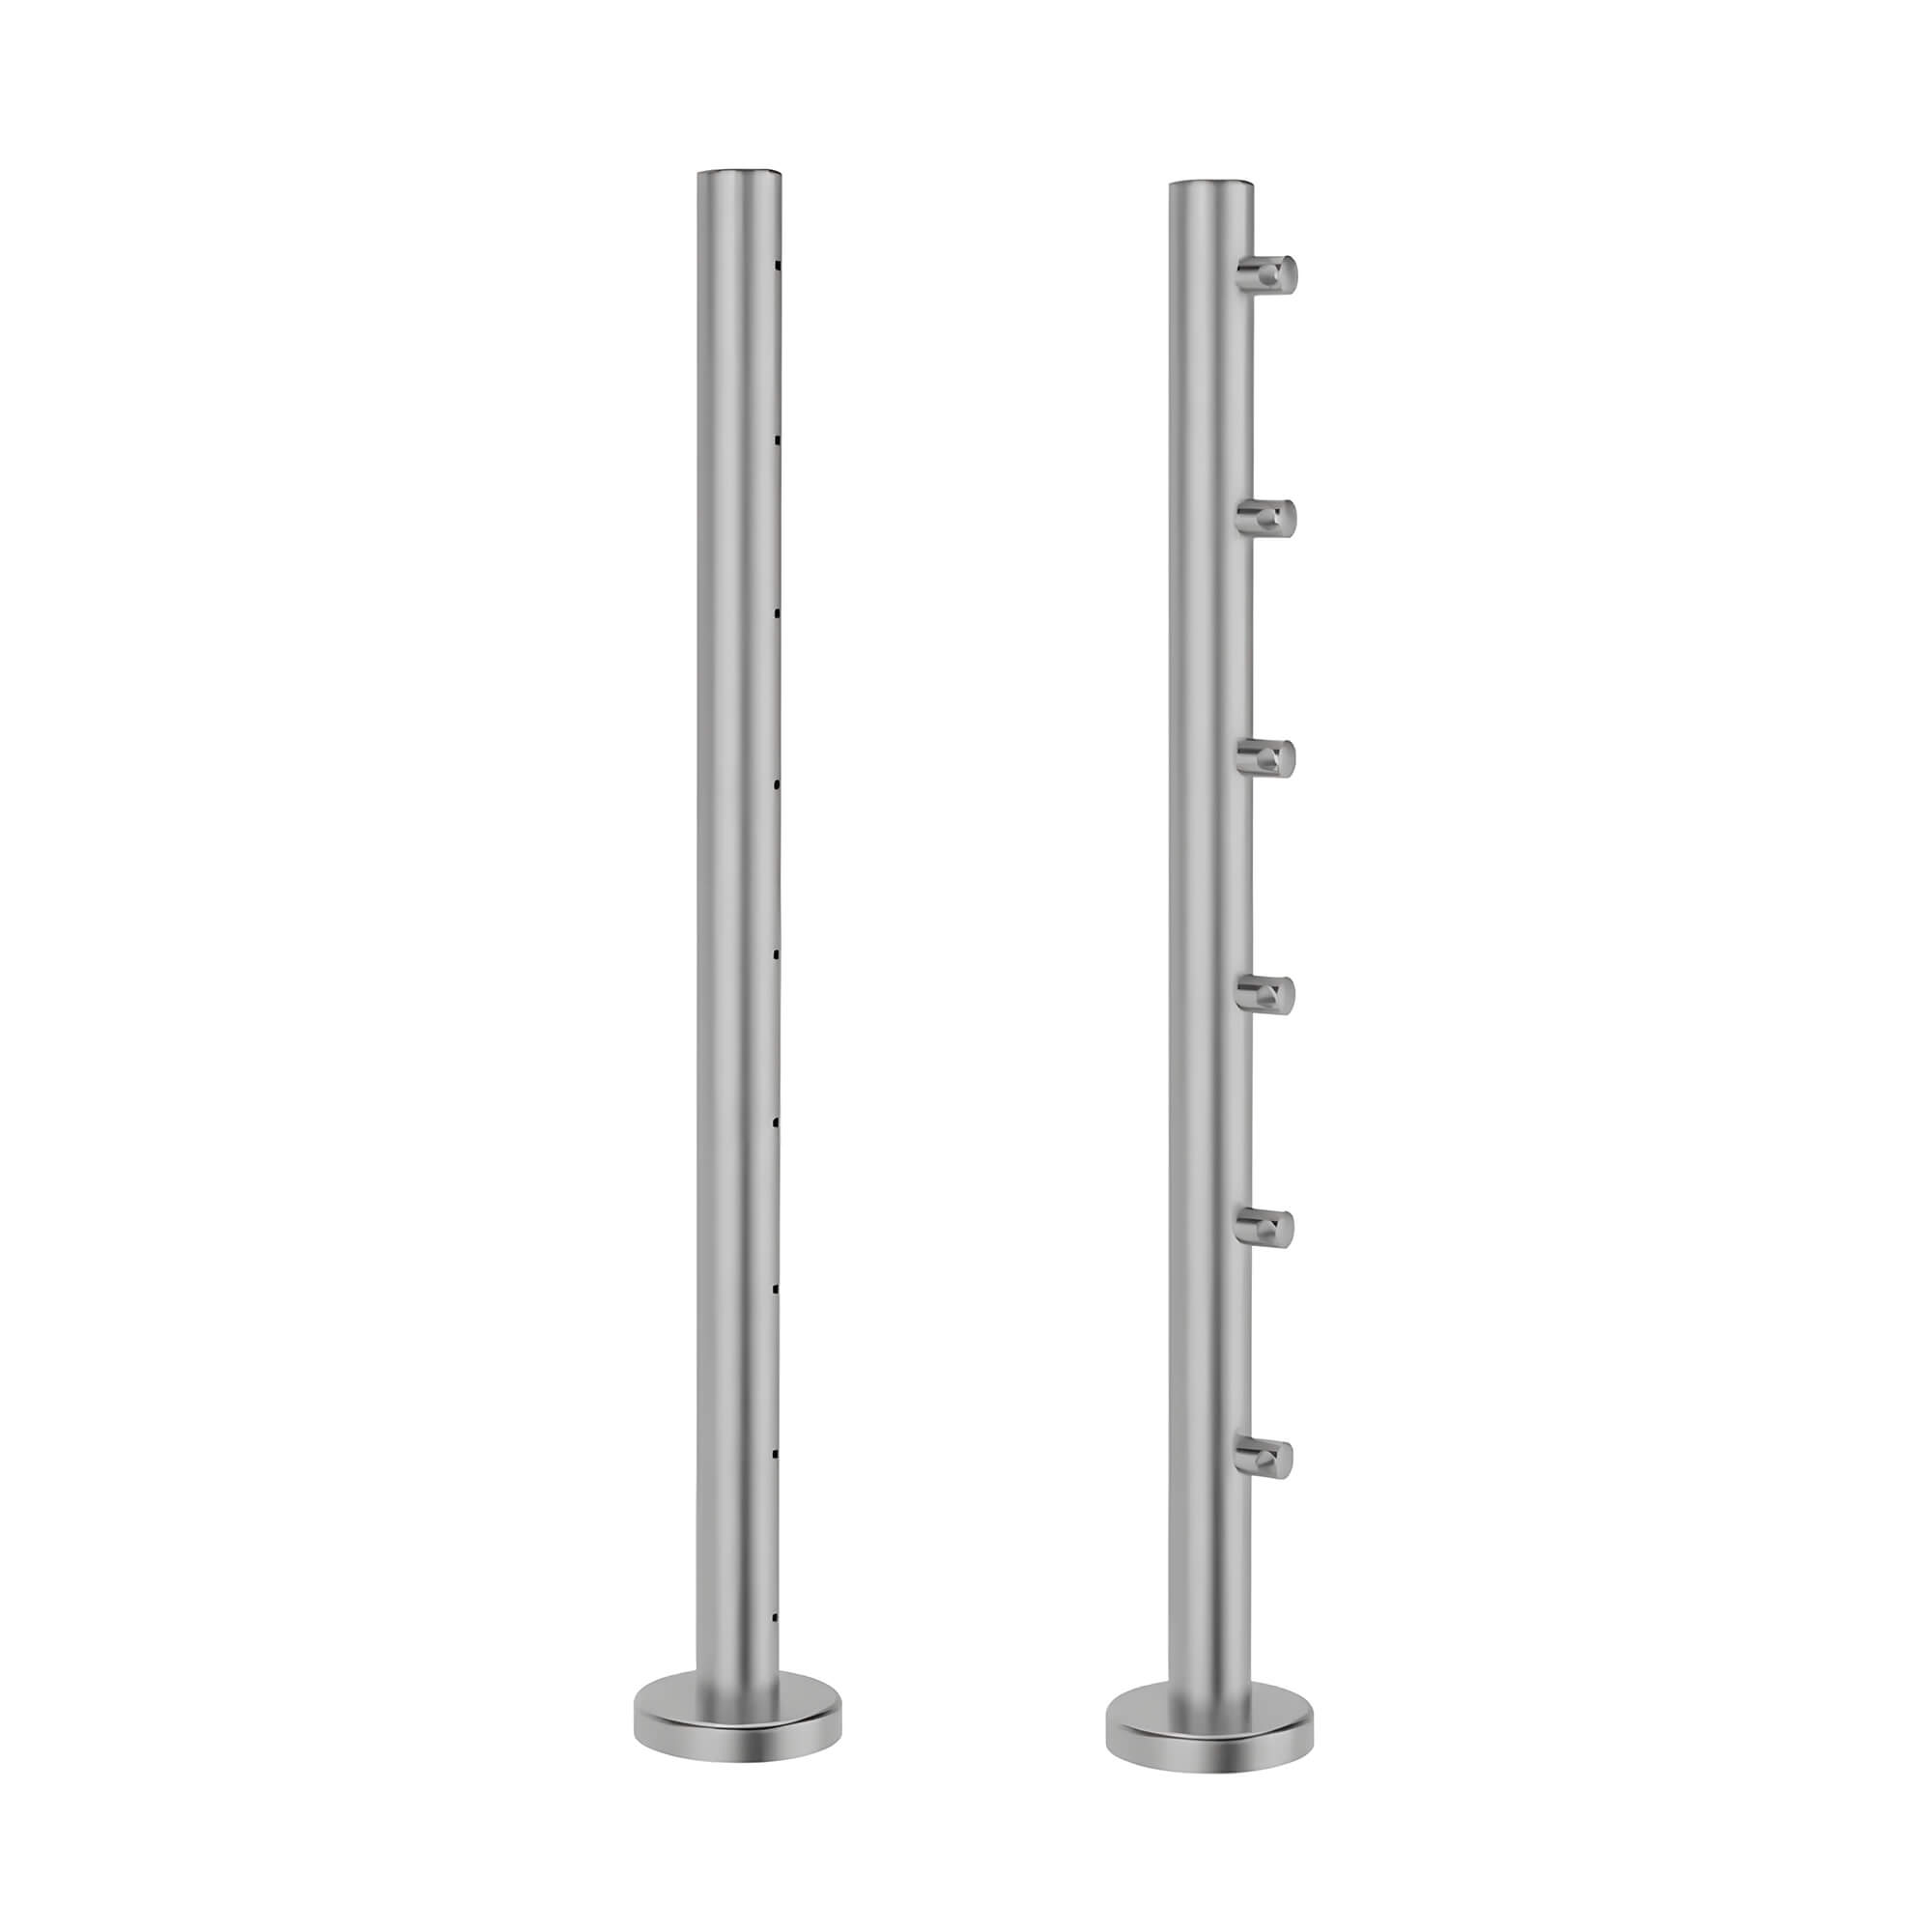 Stainless Steel Bar Railing Post For Exterior Stair Balustrade Balcony Porch Railing